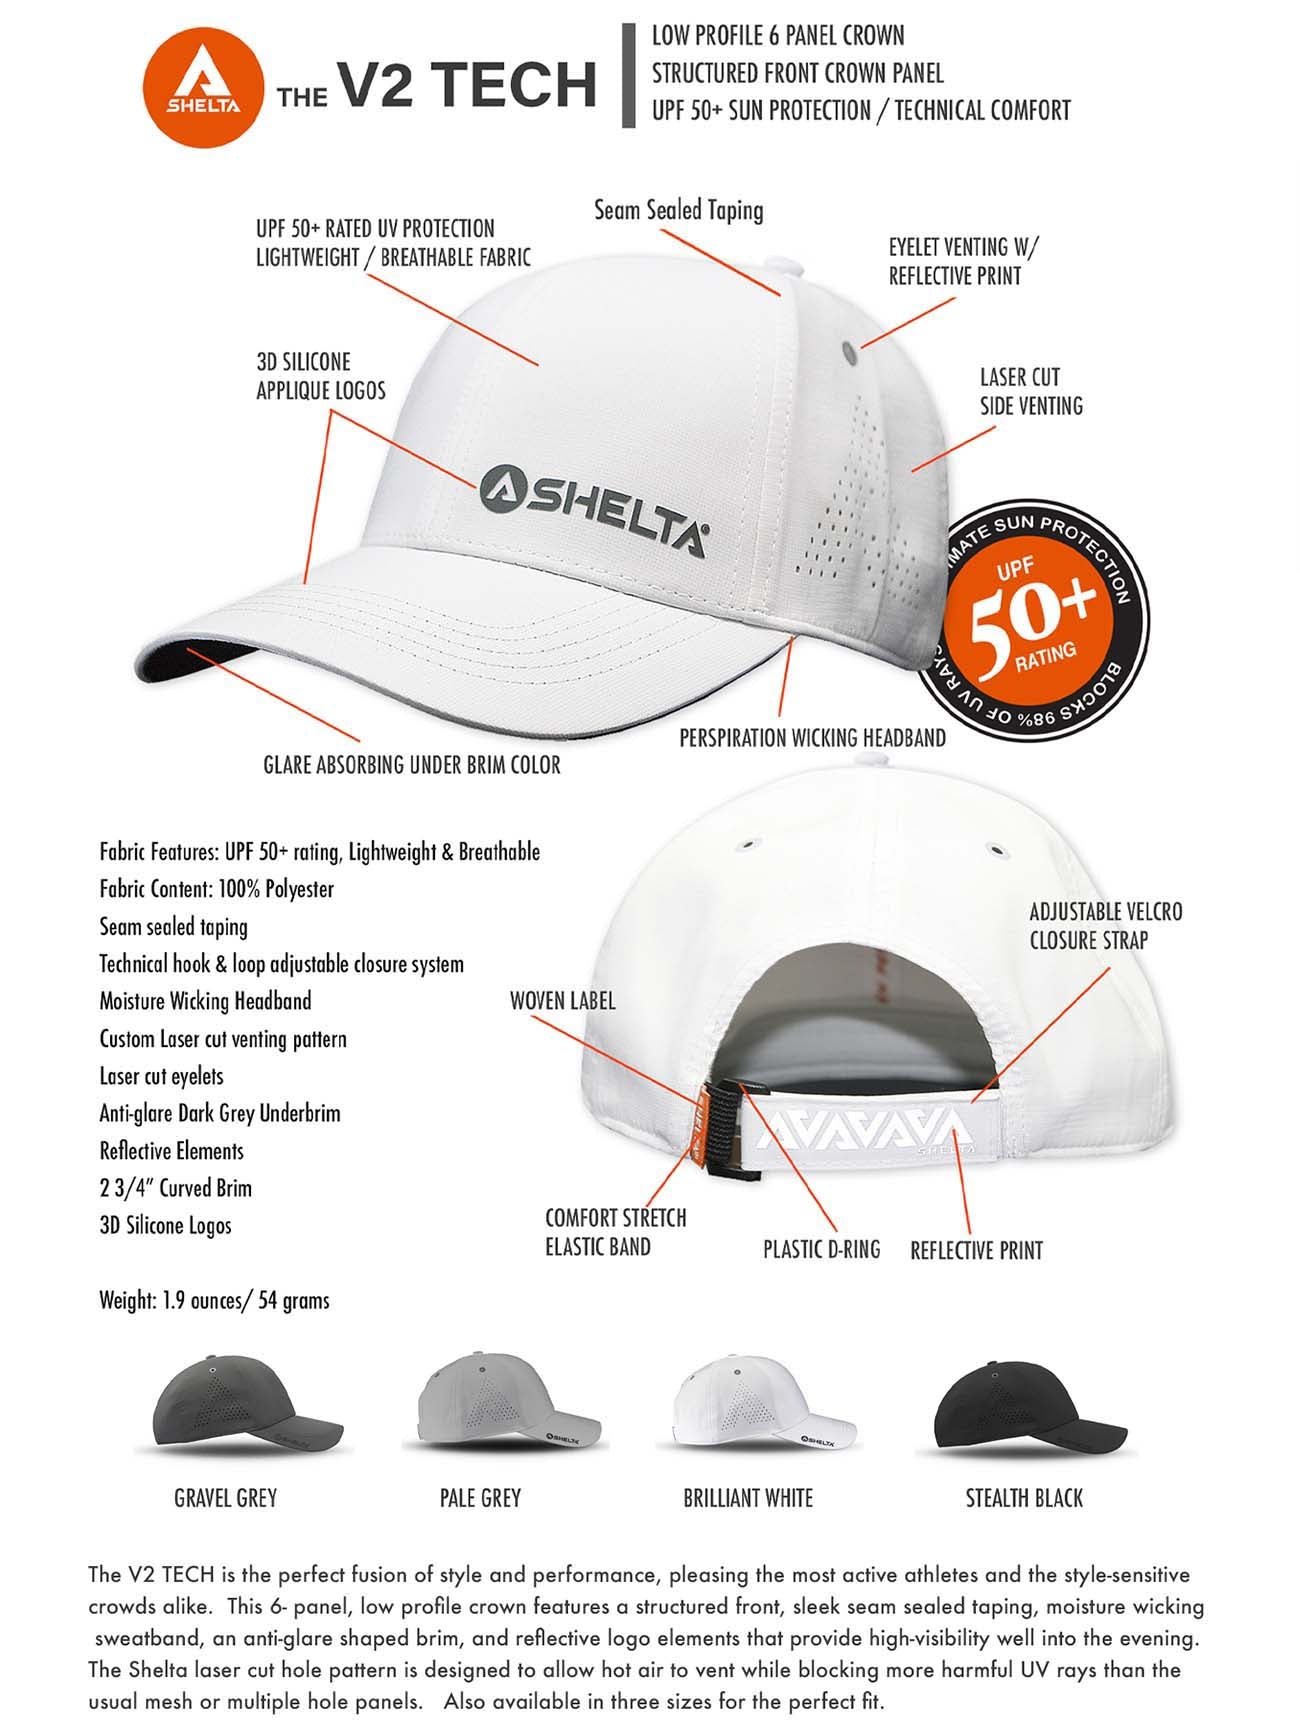 The V2 TECH is the perfect fusion of style and performance, pleasing the most active athletes and the style-sensitive crowds alike.  This 6- panel, low profile crown features a structured front, sleek seam sealed taping, moisture wicking  sweatband, an anti-glare shaped brim, and reflective logo elements that provide high-visibility well into the evening.   The Shelta laser cut hole pattern is designed to allow hot air to vent while blocking more harmful UV rays than the usual mesh or multiple hole panels.   Also available in three sizes for the perfect fit